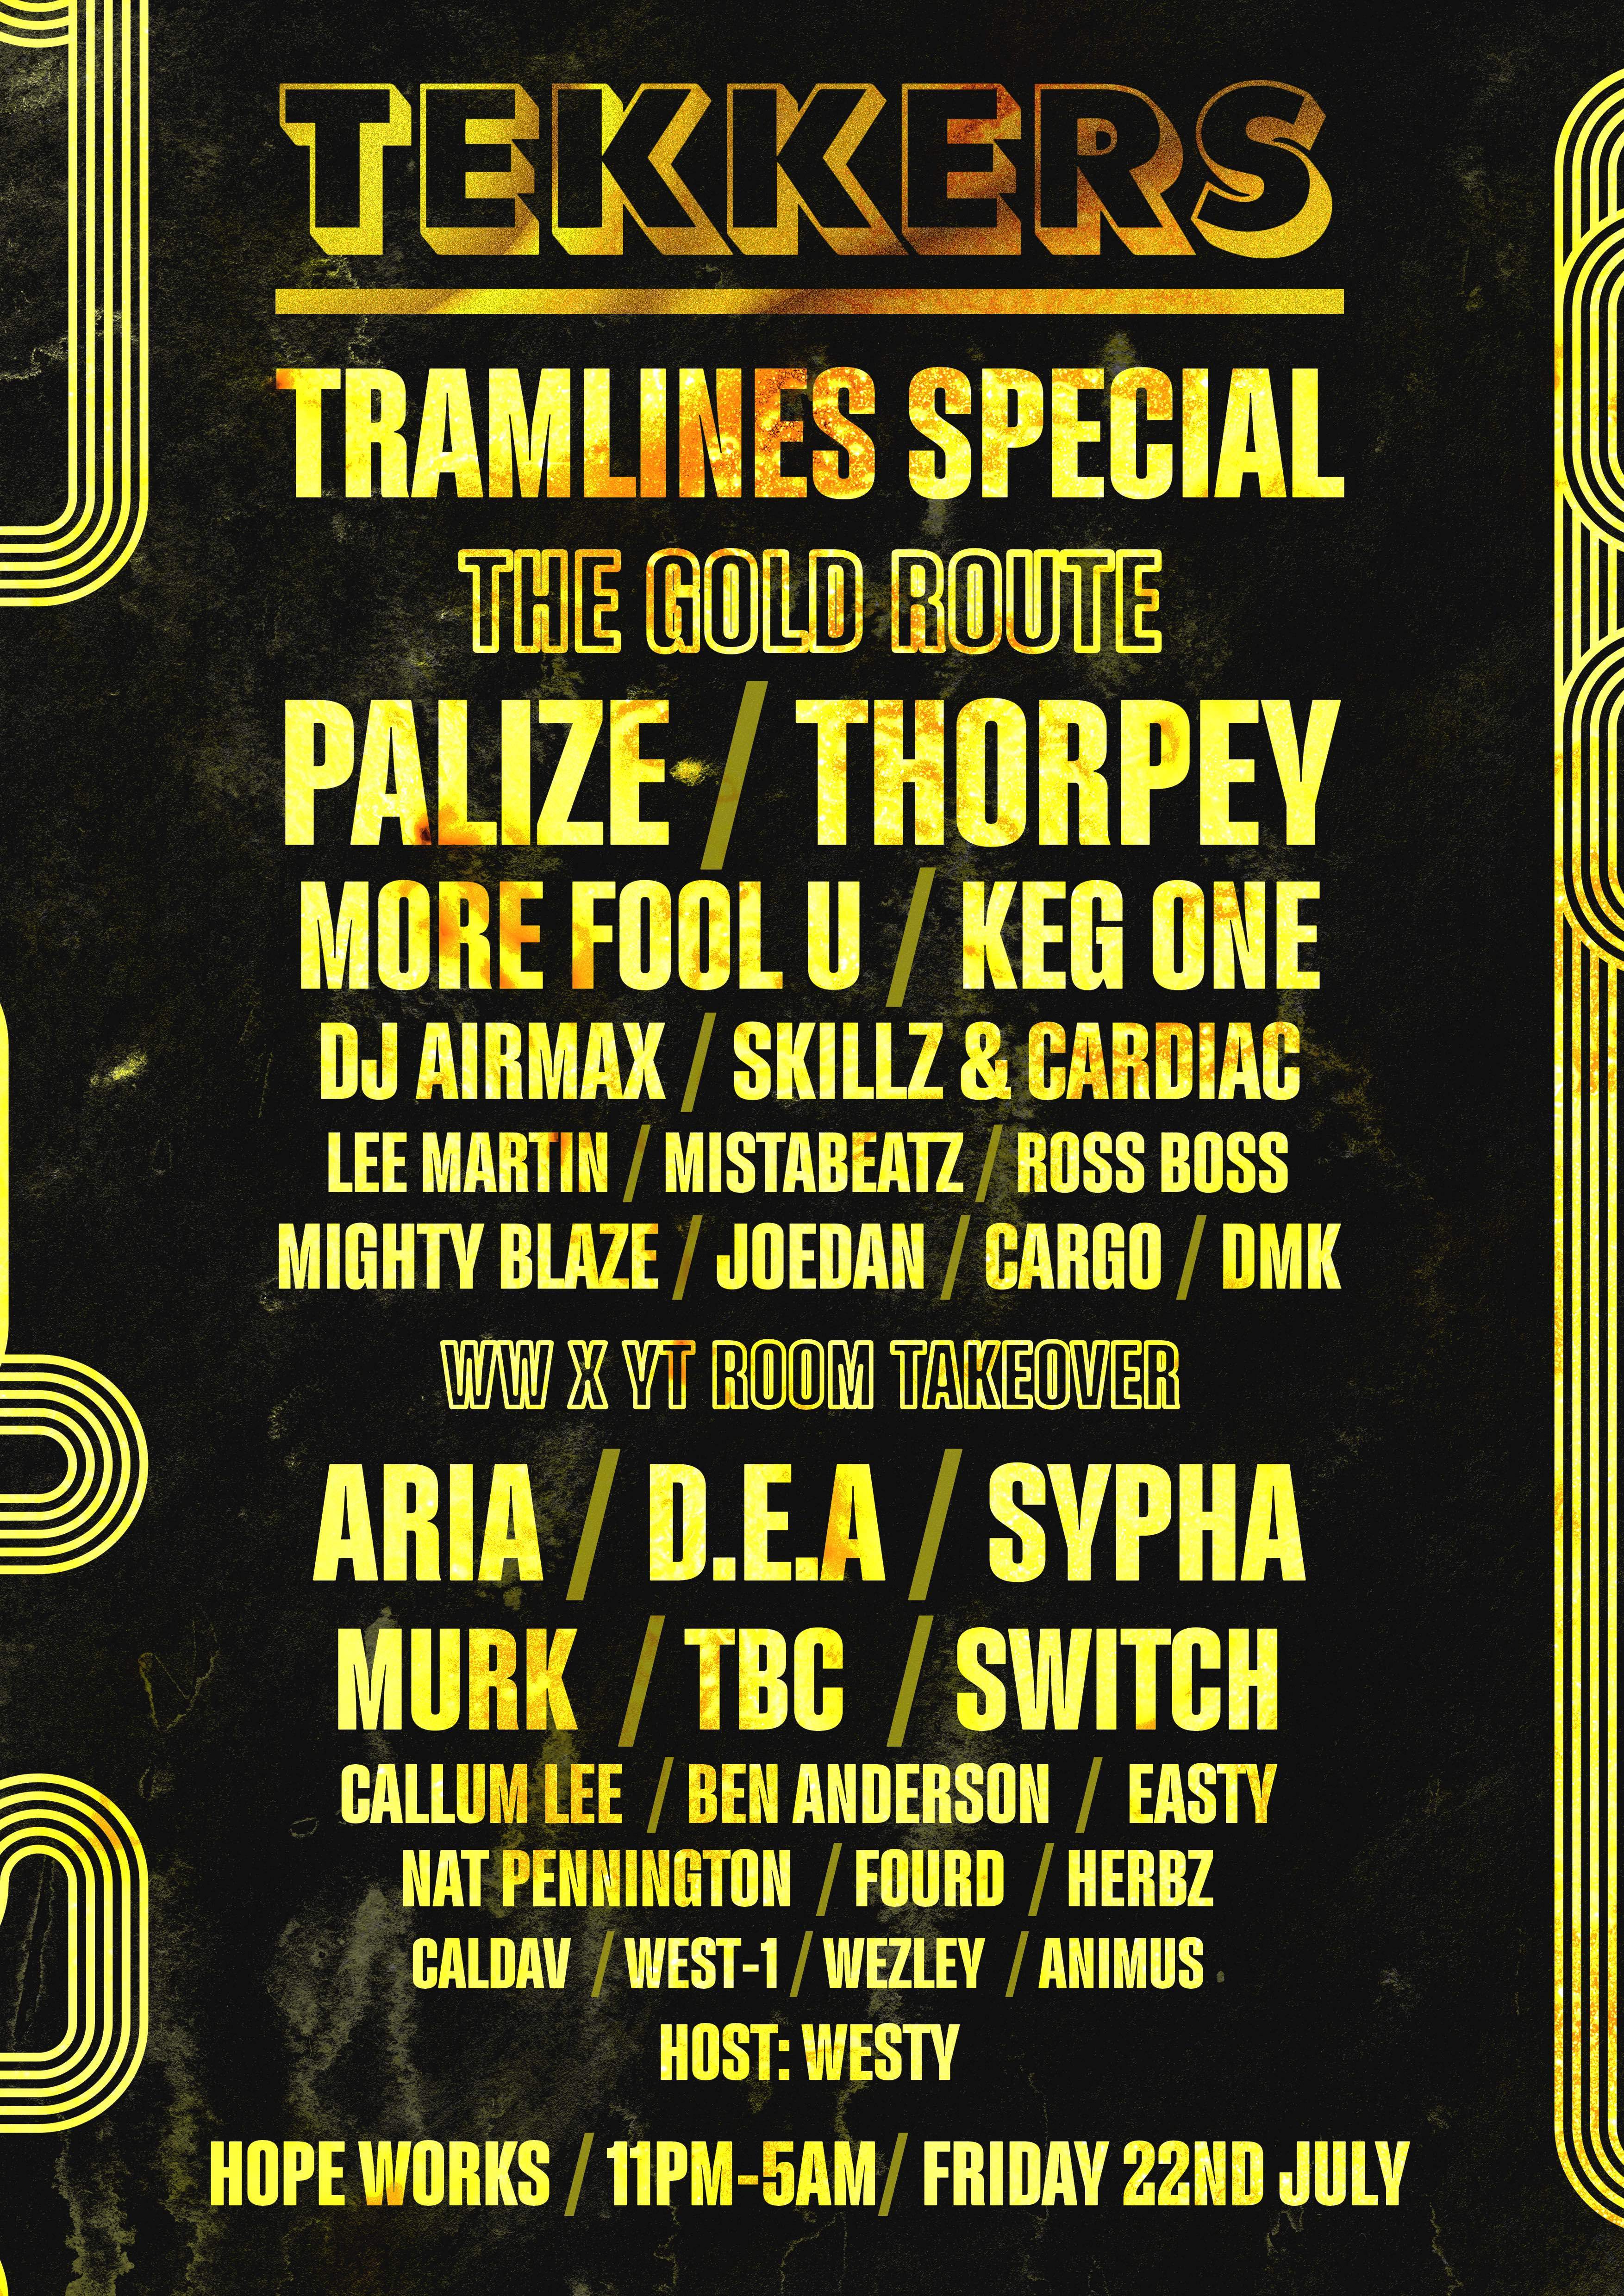 Tekkers Tramlines Special - The Gold Route Friday 22nd July - フライヤー表